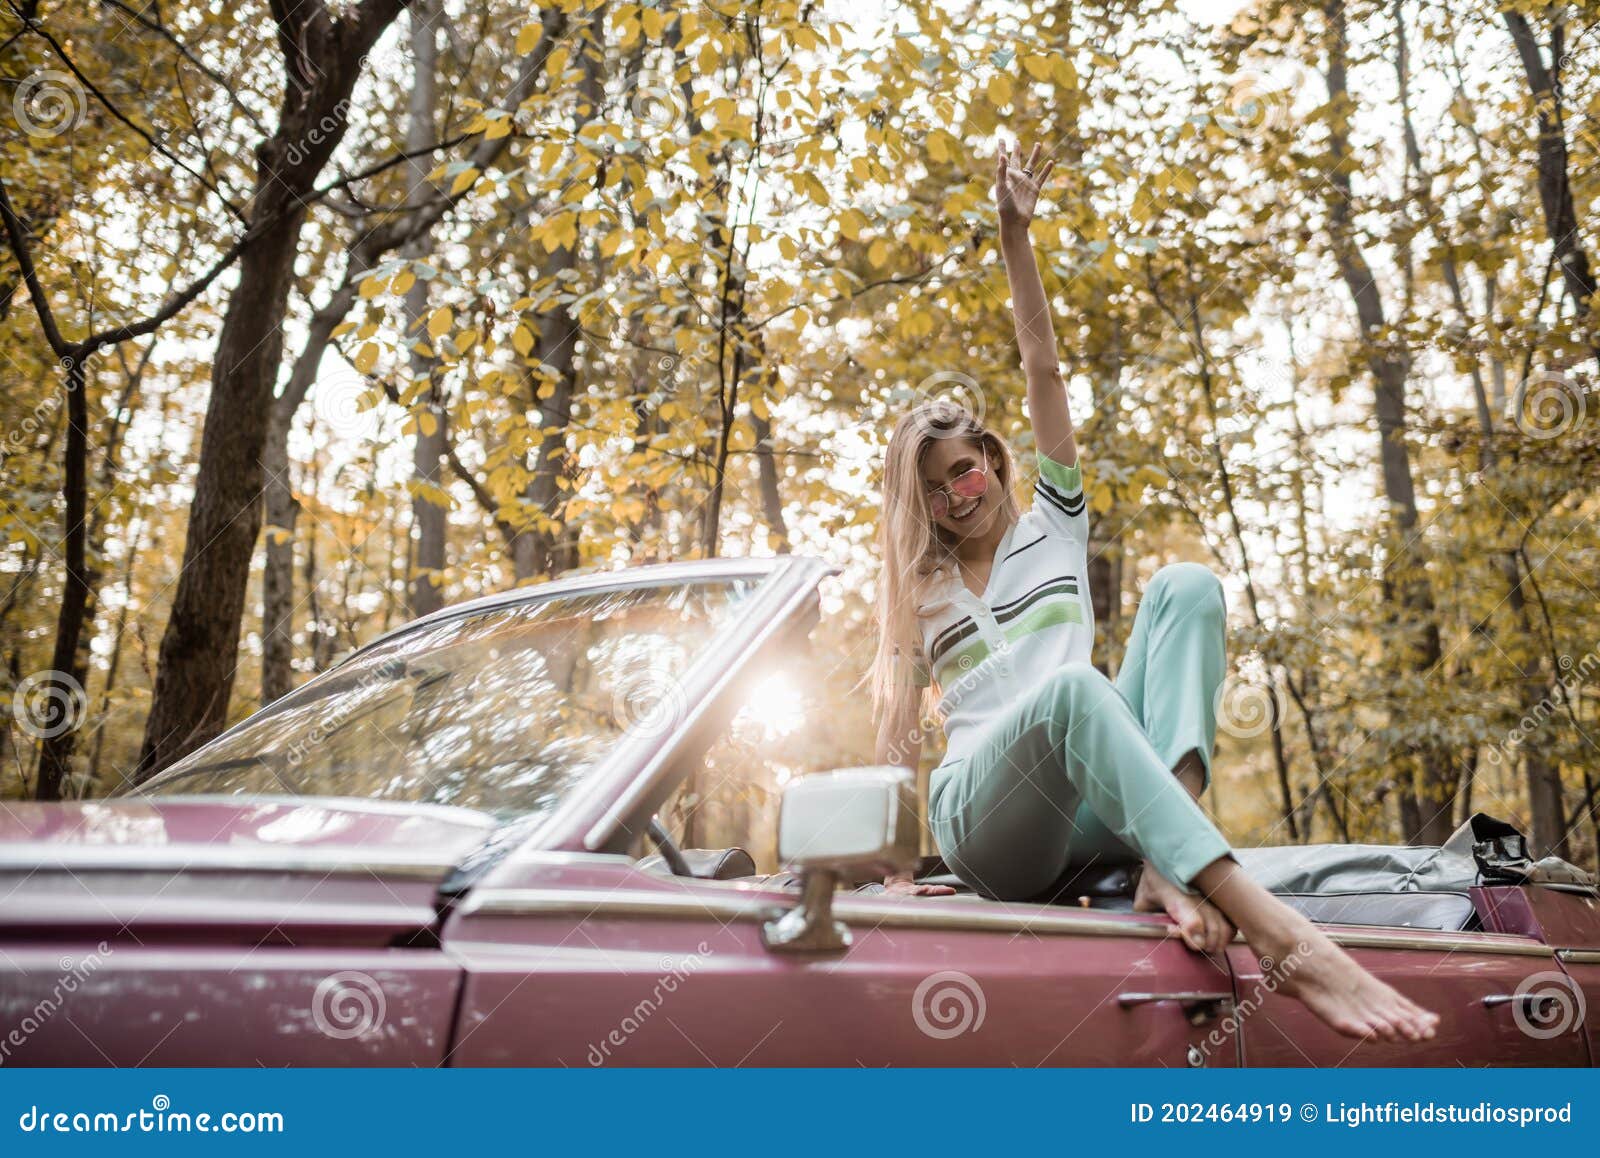 https://thumbs.dreamstime.com/z/barefoot-woman-looking-camera-joyful-barefoot-woman-looking-camera-posing-hand-air-cabriolet-202464919.jpg